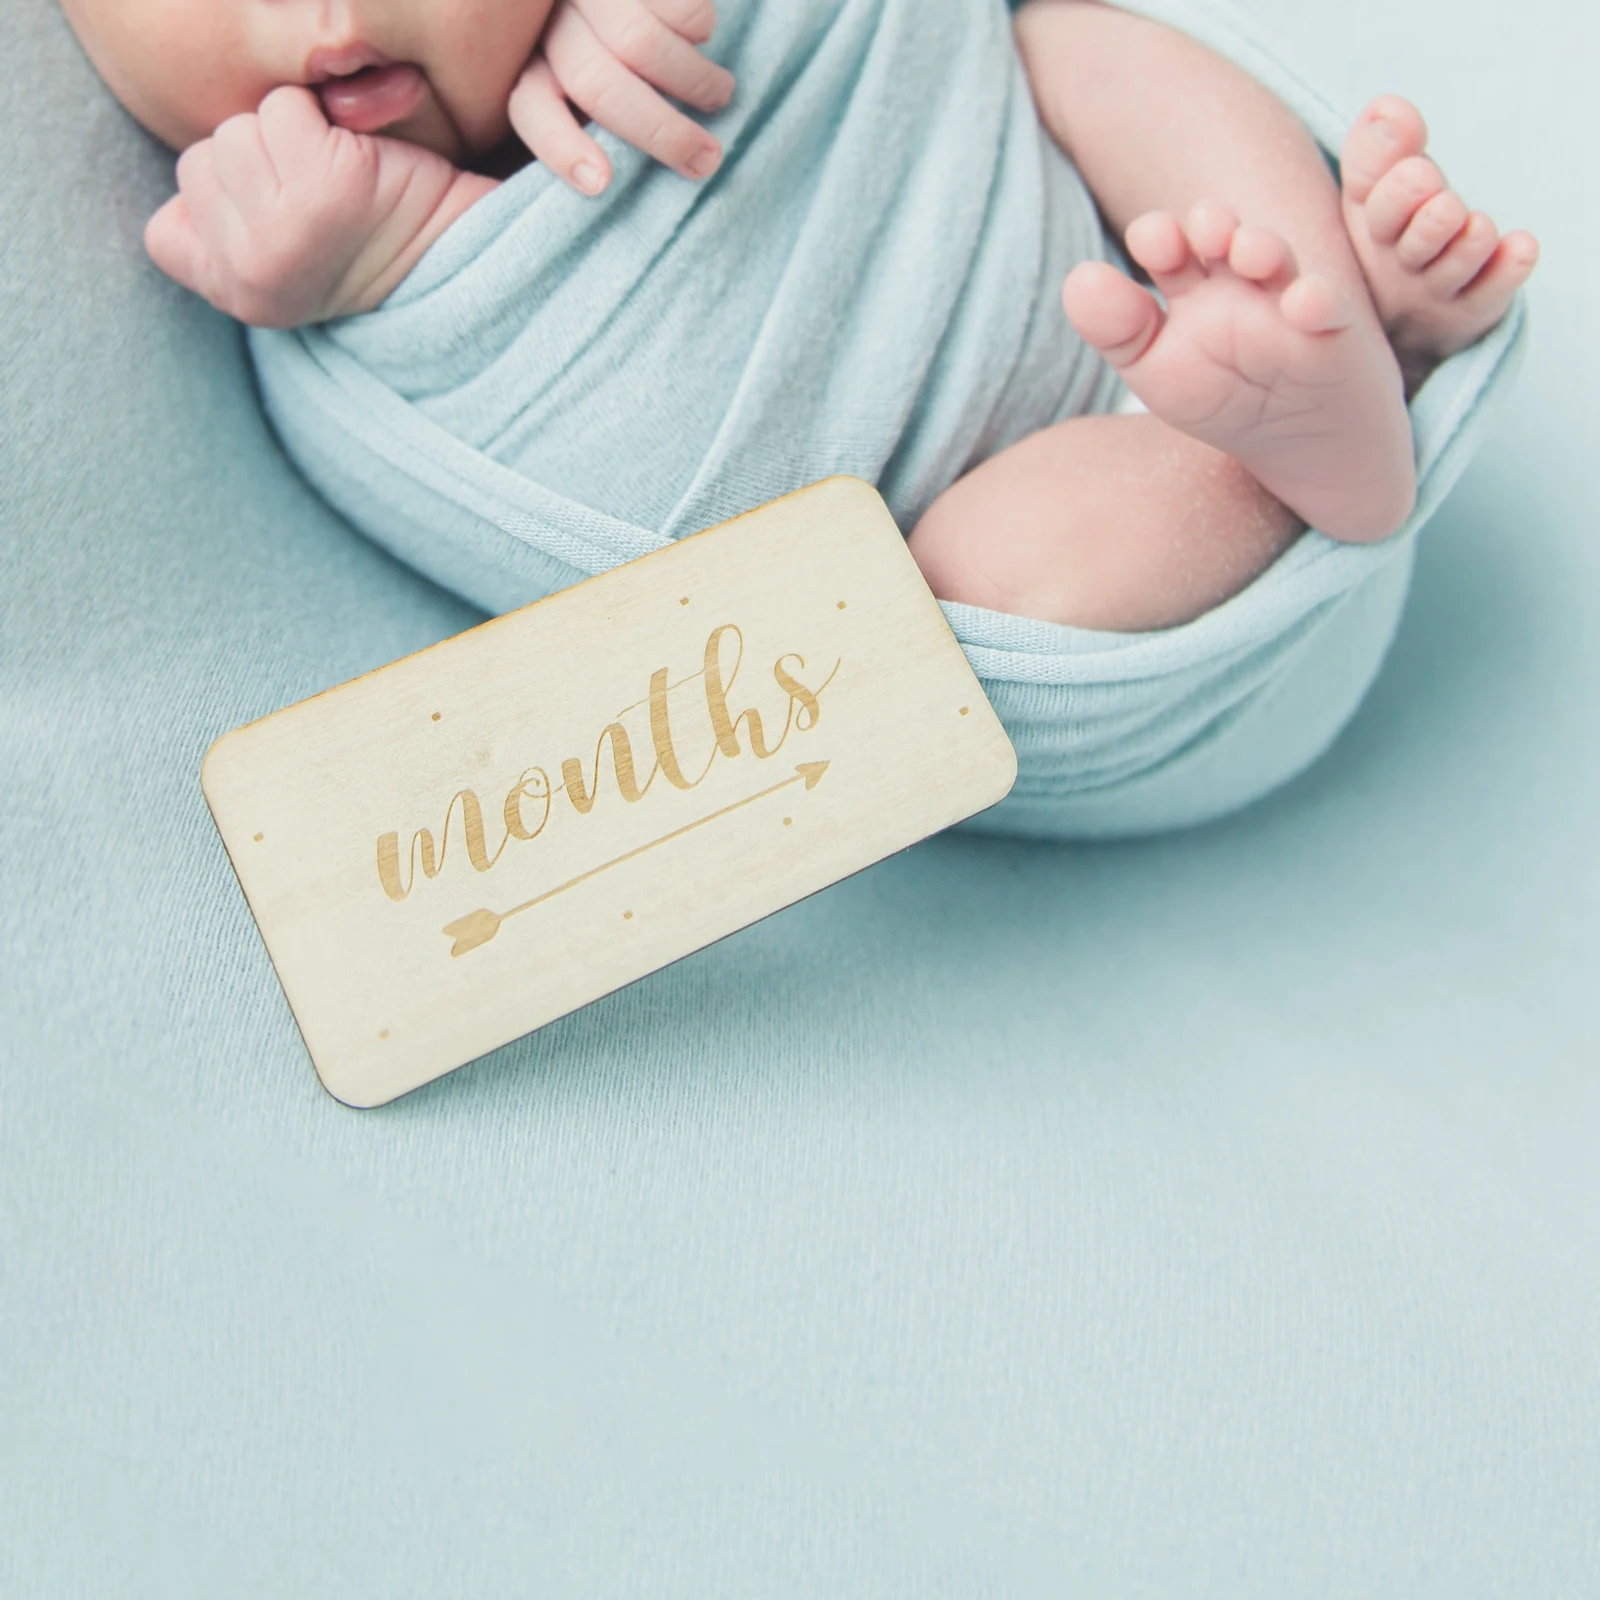 

7 Pcs Handmade Baby Milestone Cards Wooden Double-sided Monthly Photocards Newborn Birth Growth Album Photography Props Souvenir